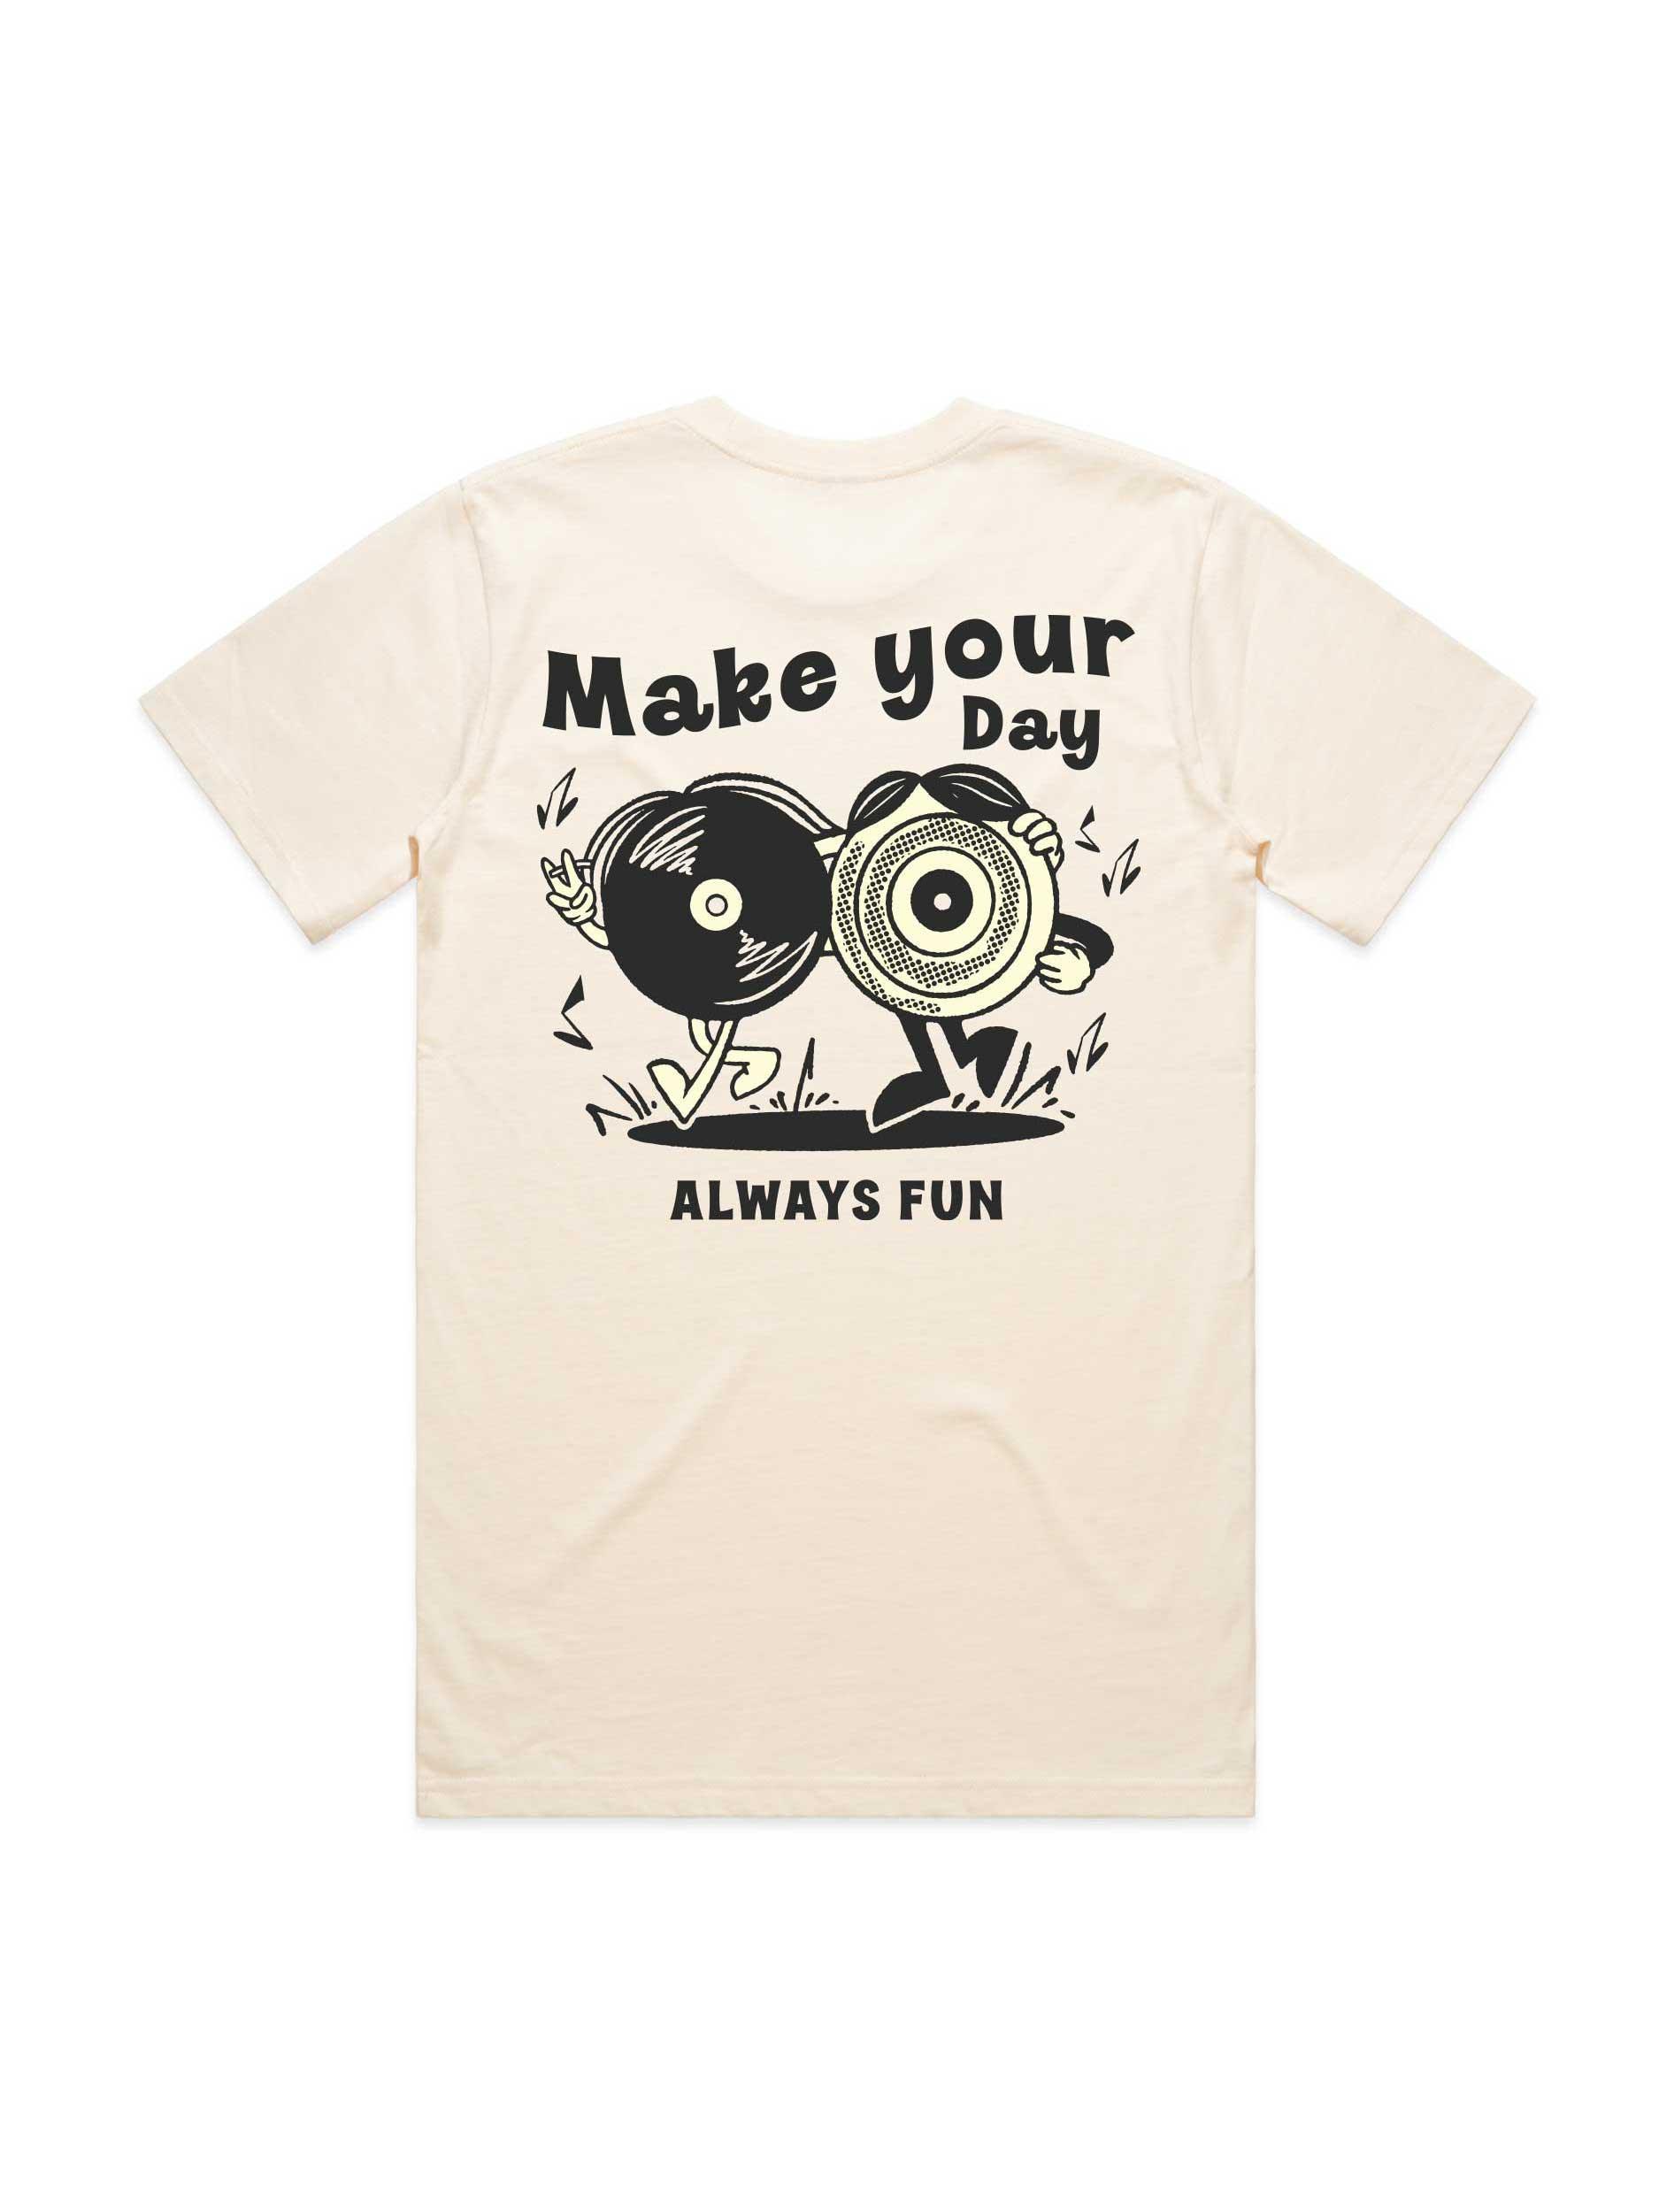 Make Your Day T-Shirt - Watershed Brand